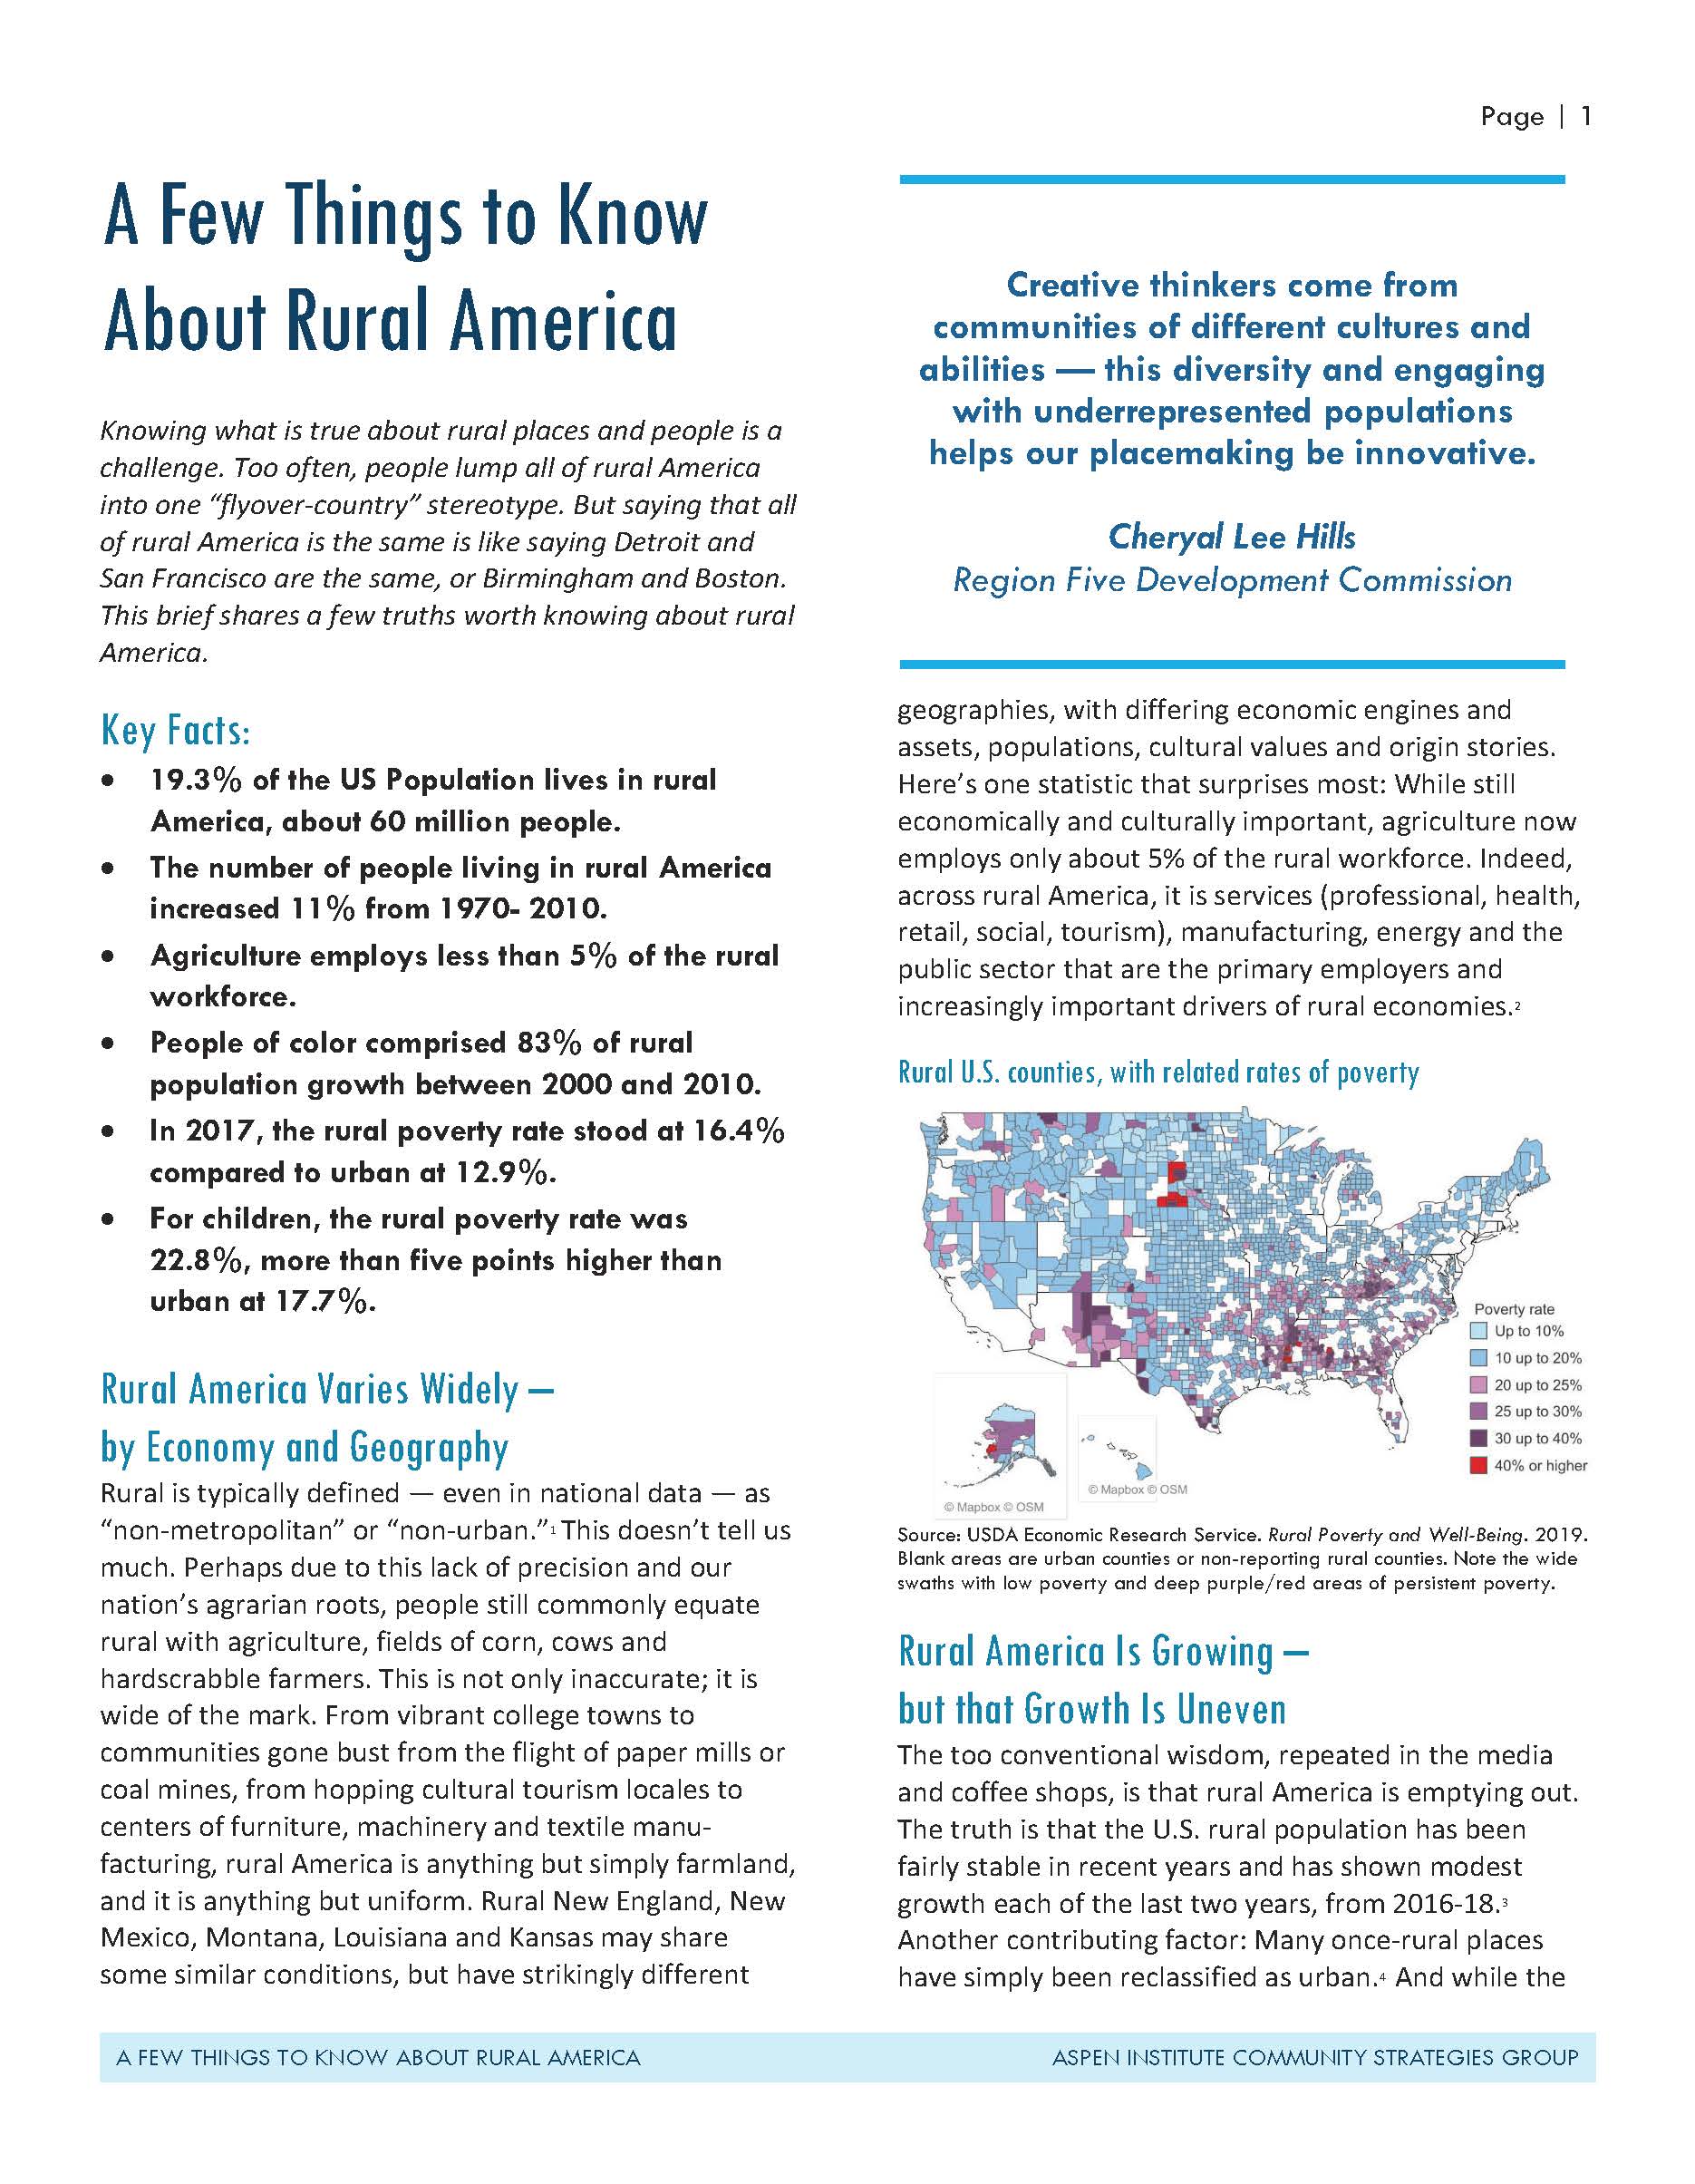 A Few Things to Know Abut Rural America report page